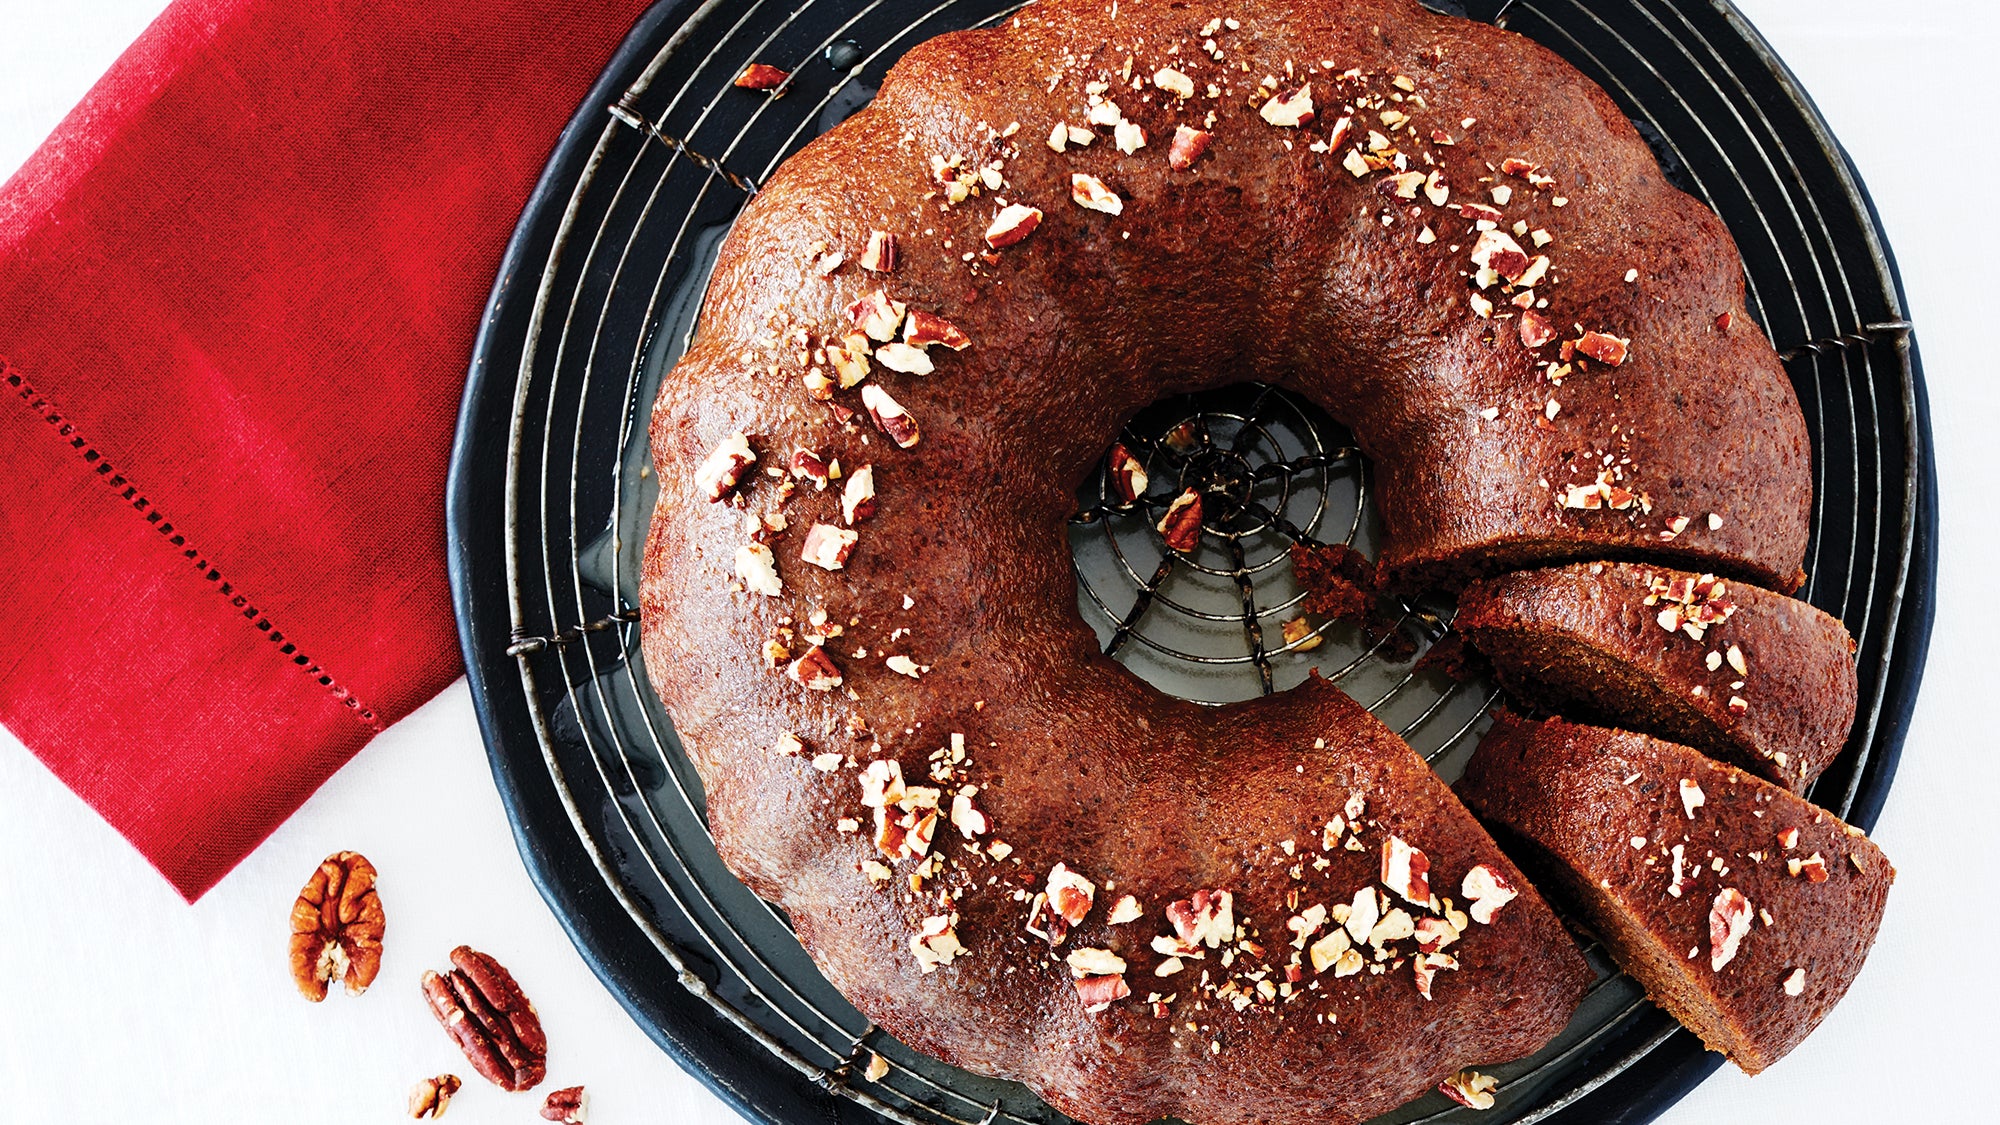 Cherry Vanilla Coffee Cake with Cream Cheese Glaze - perfect for brunch!